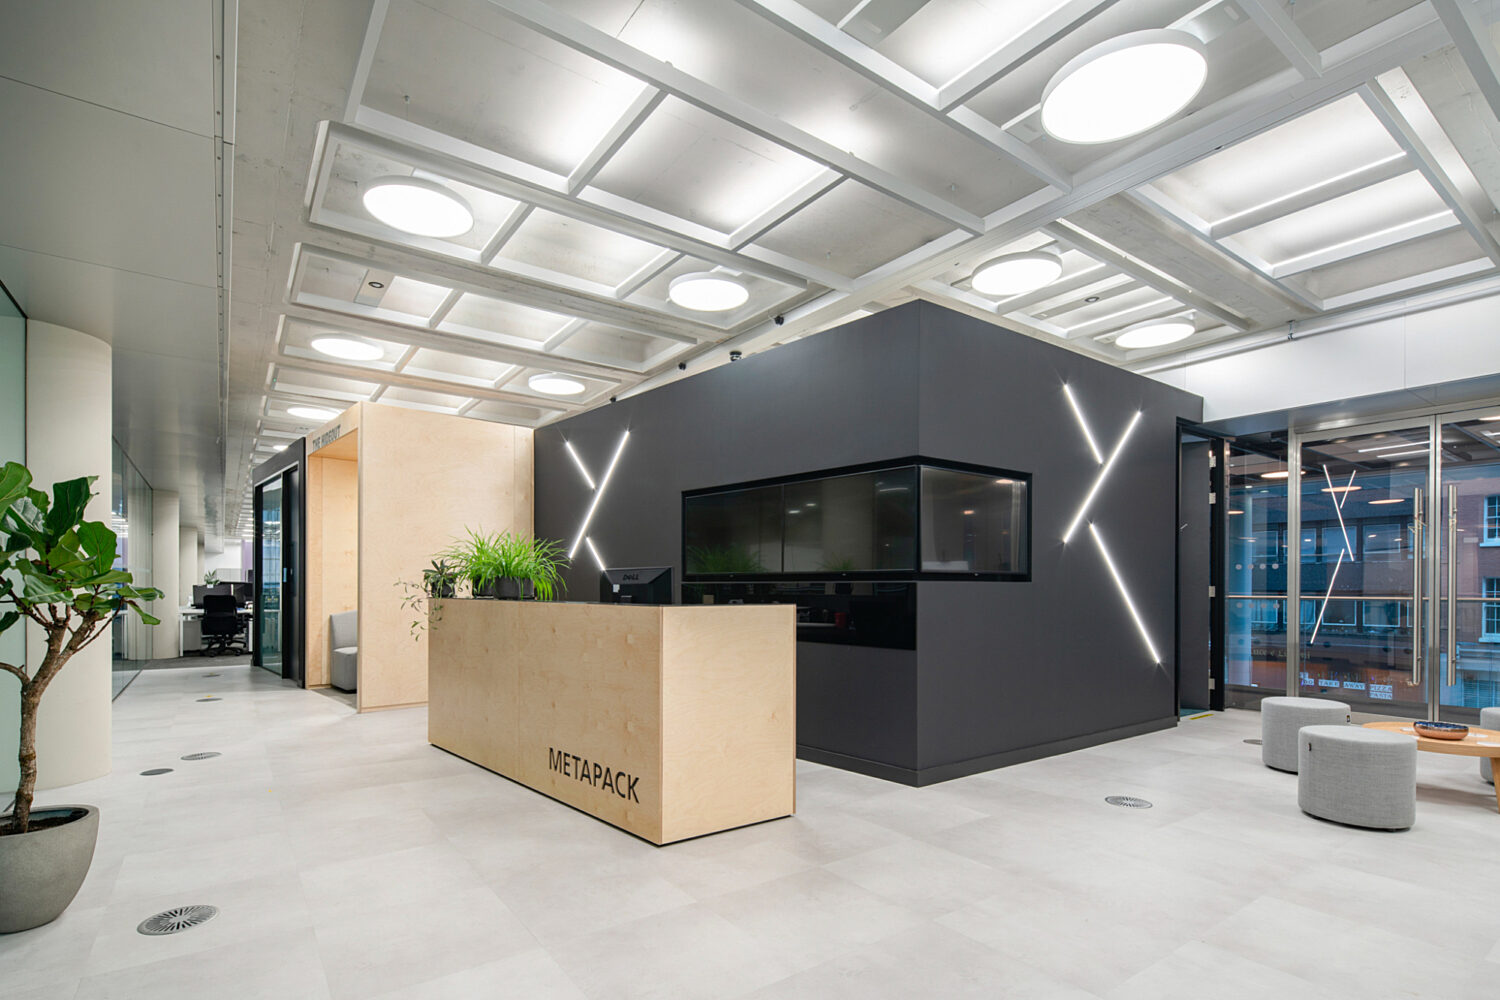 Metapack office reception